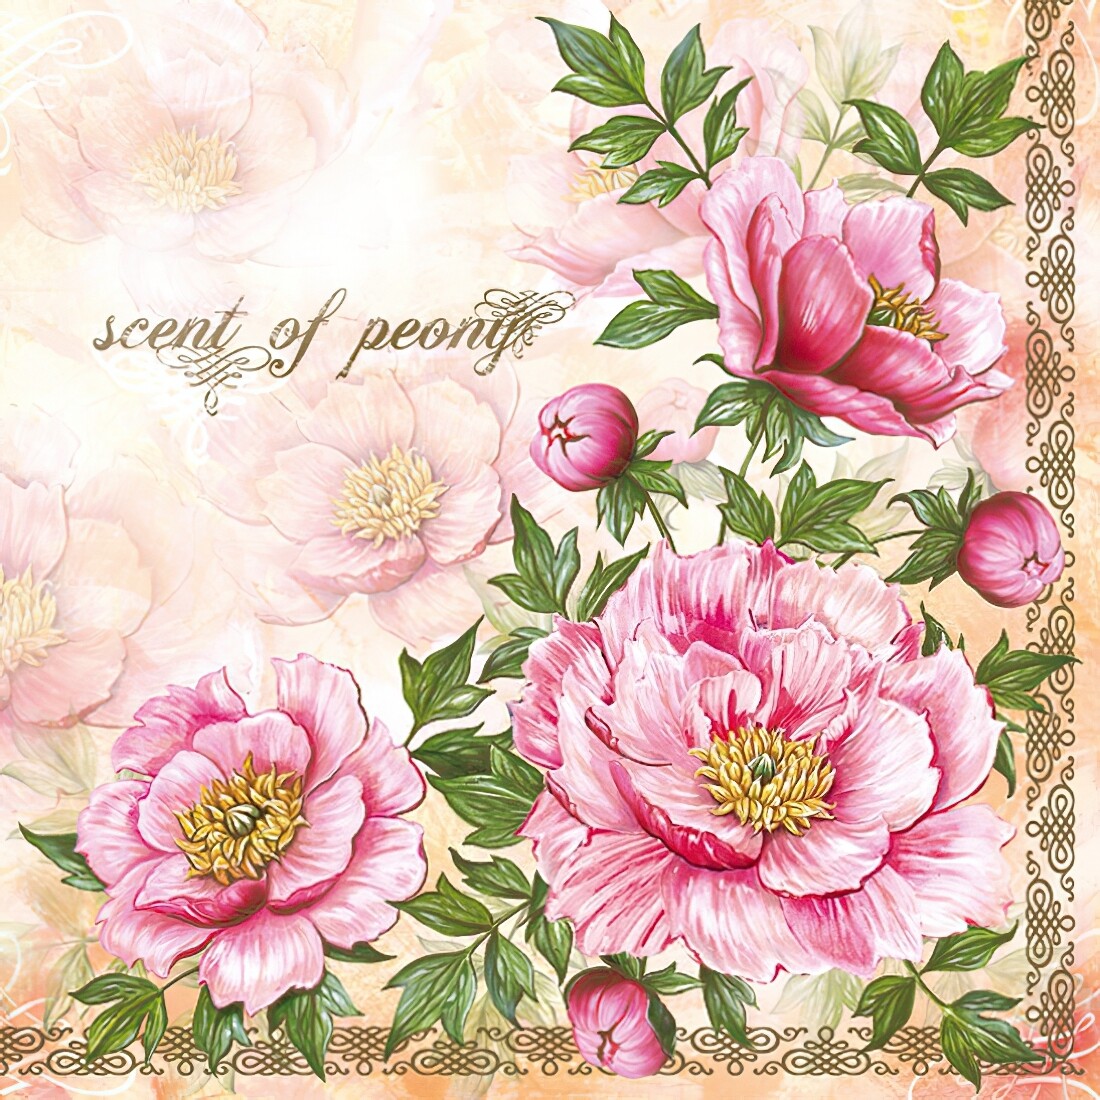 Decoupage Paper Napkins - Floral - Scent of Peony (1 Sheet)